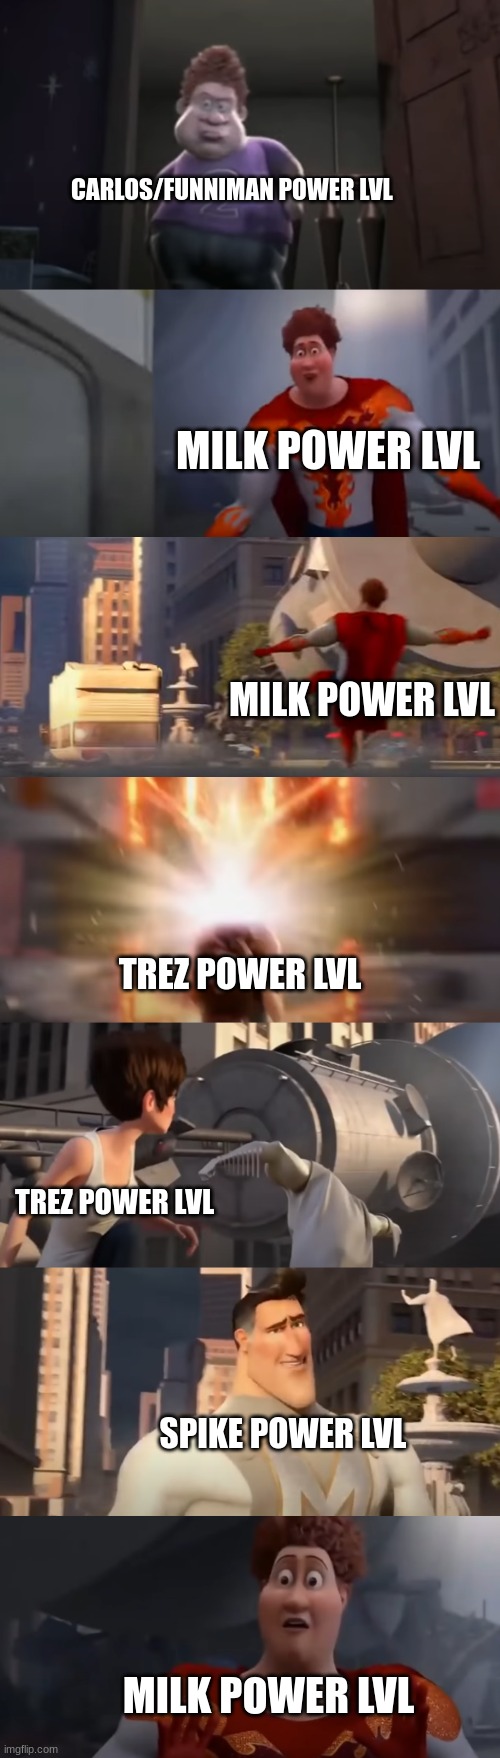 Snotty Boy Glow Up Meme extended | CARLOS/FUNNIMAN POWER LVL; MILK POWER LVL; MILK POWER LVL; TREZ POWER LVL; TREZ POWER LVL; SPIKE POWER LVL; MILK POWER LVL | image tagged in snotty boy glow up meme extended | made w/ Imgflip meme maker